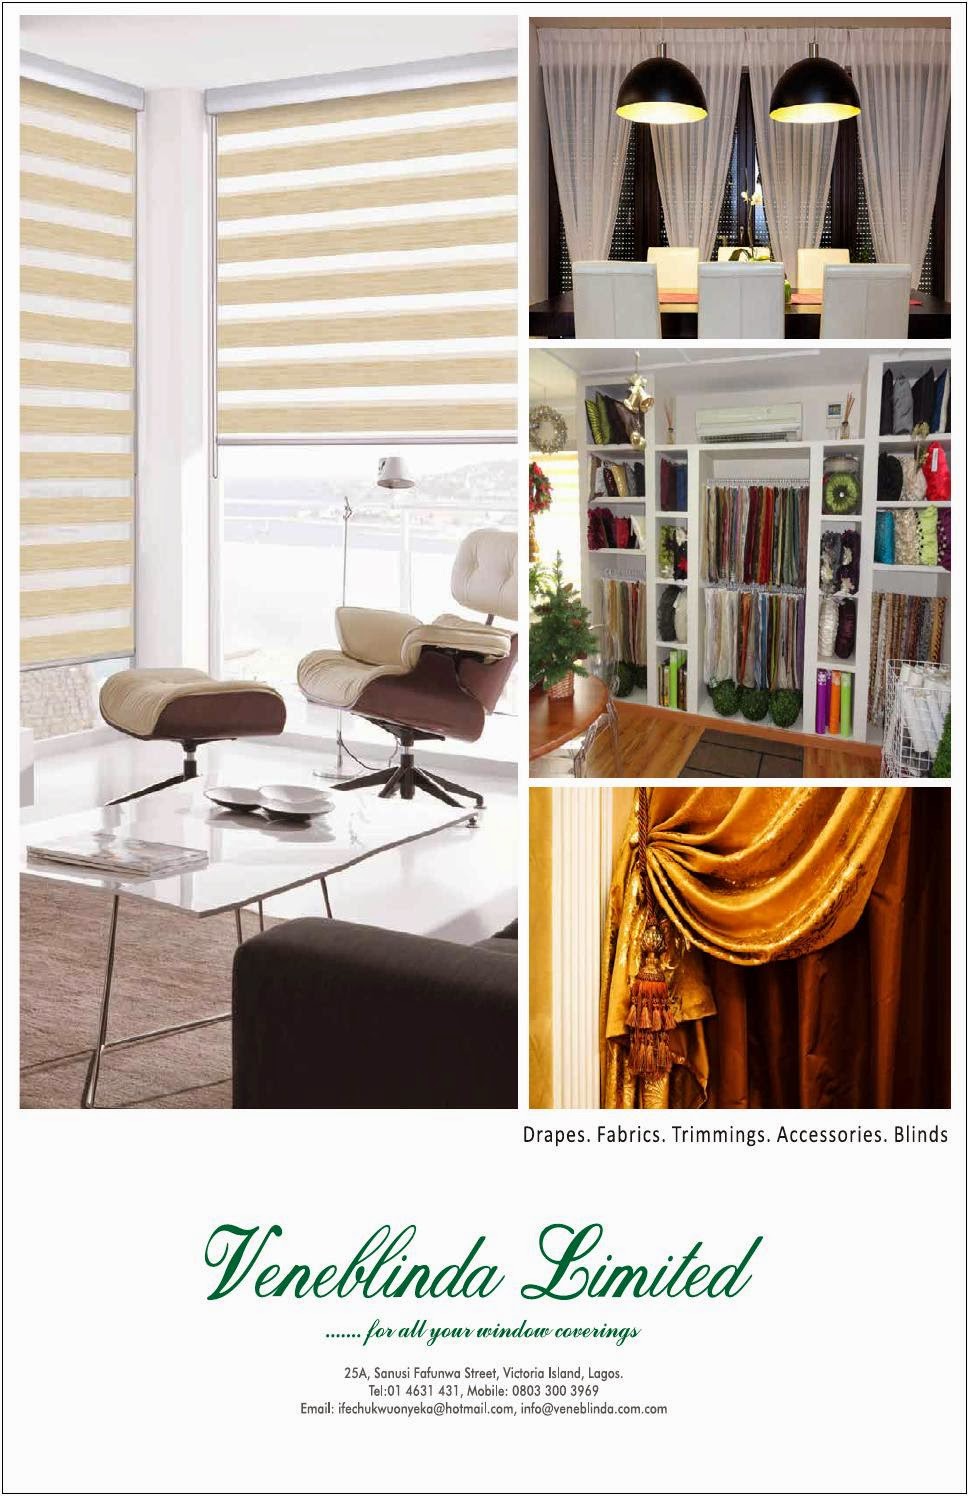 For Your Blinds and Curtains